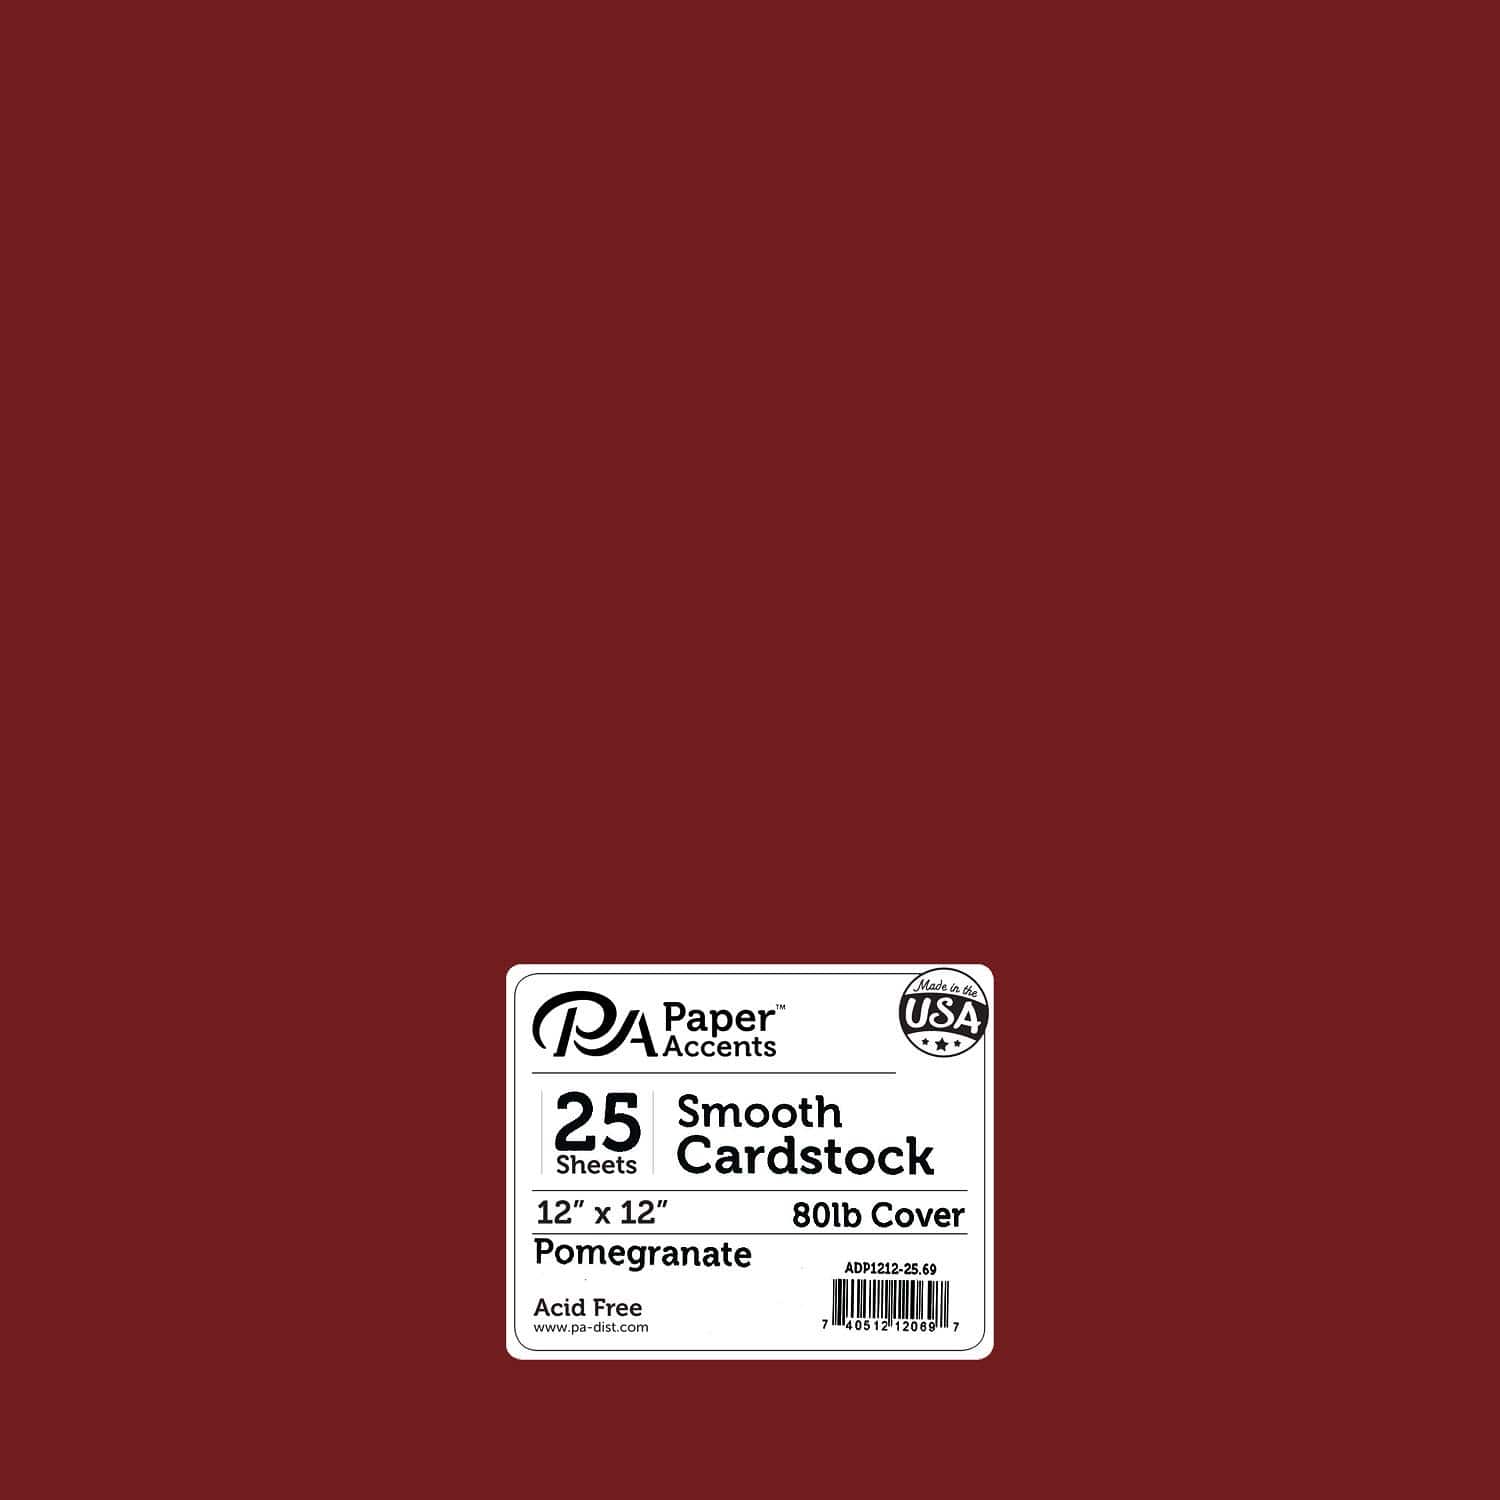 PA Paper™ Accents 12 x 12 80lb. Smooth Cardstock Paper, 25